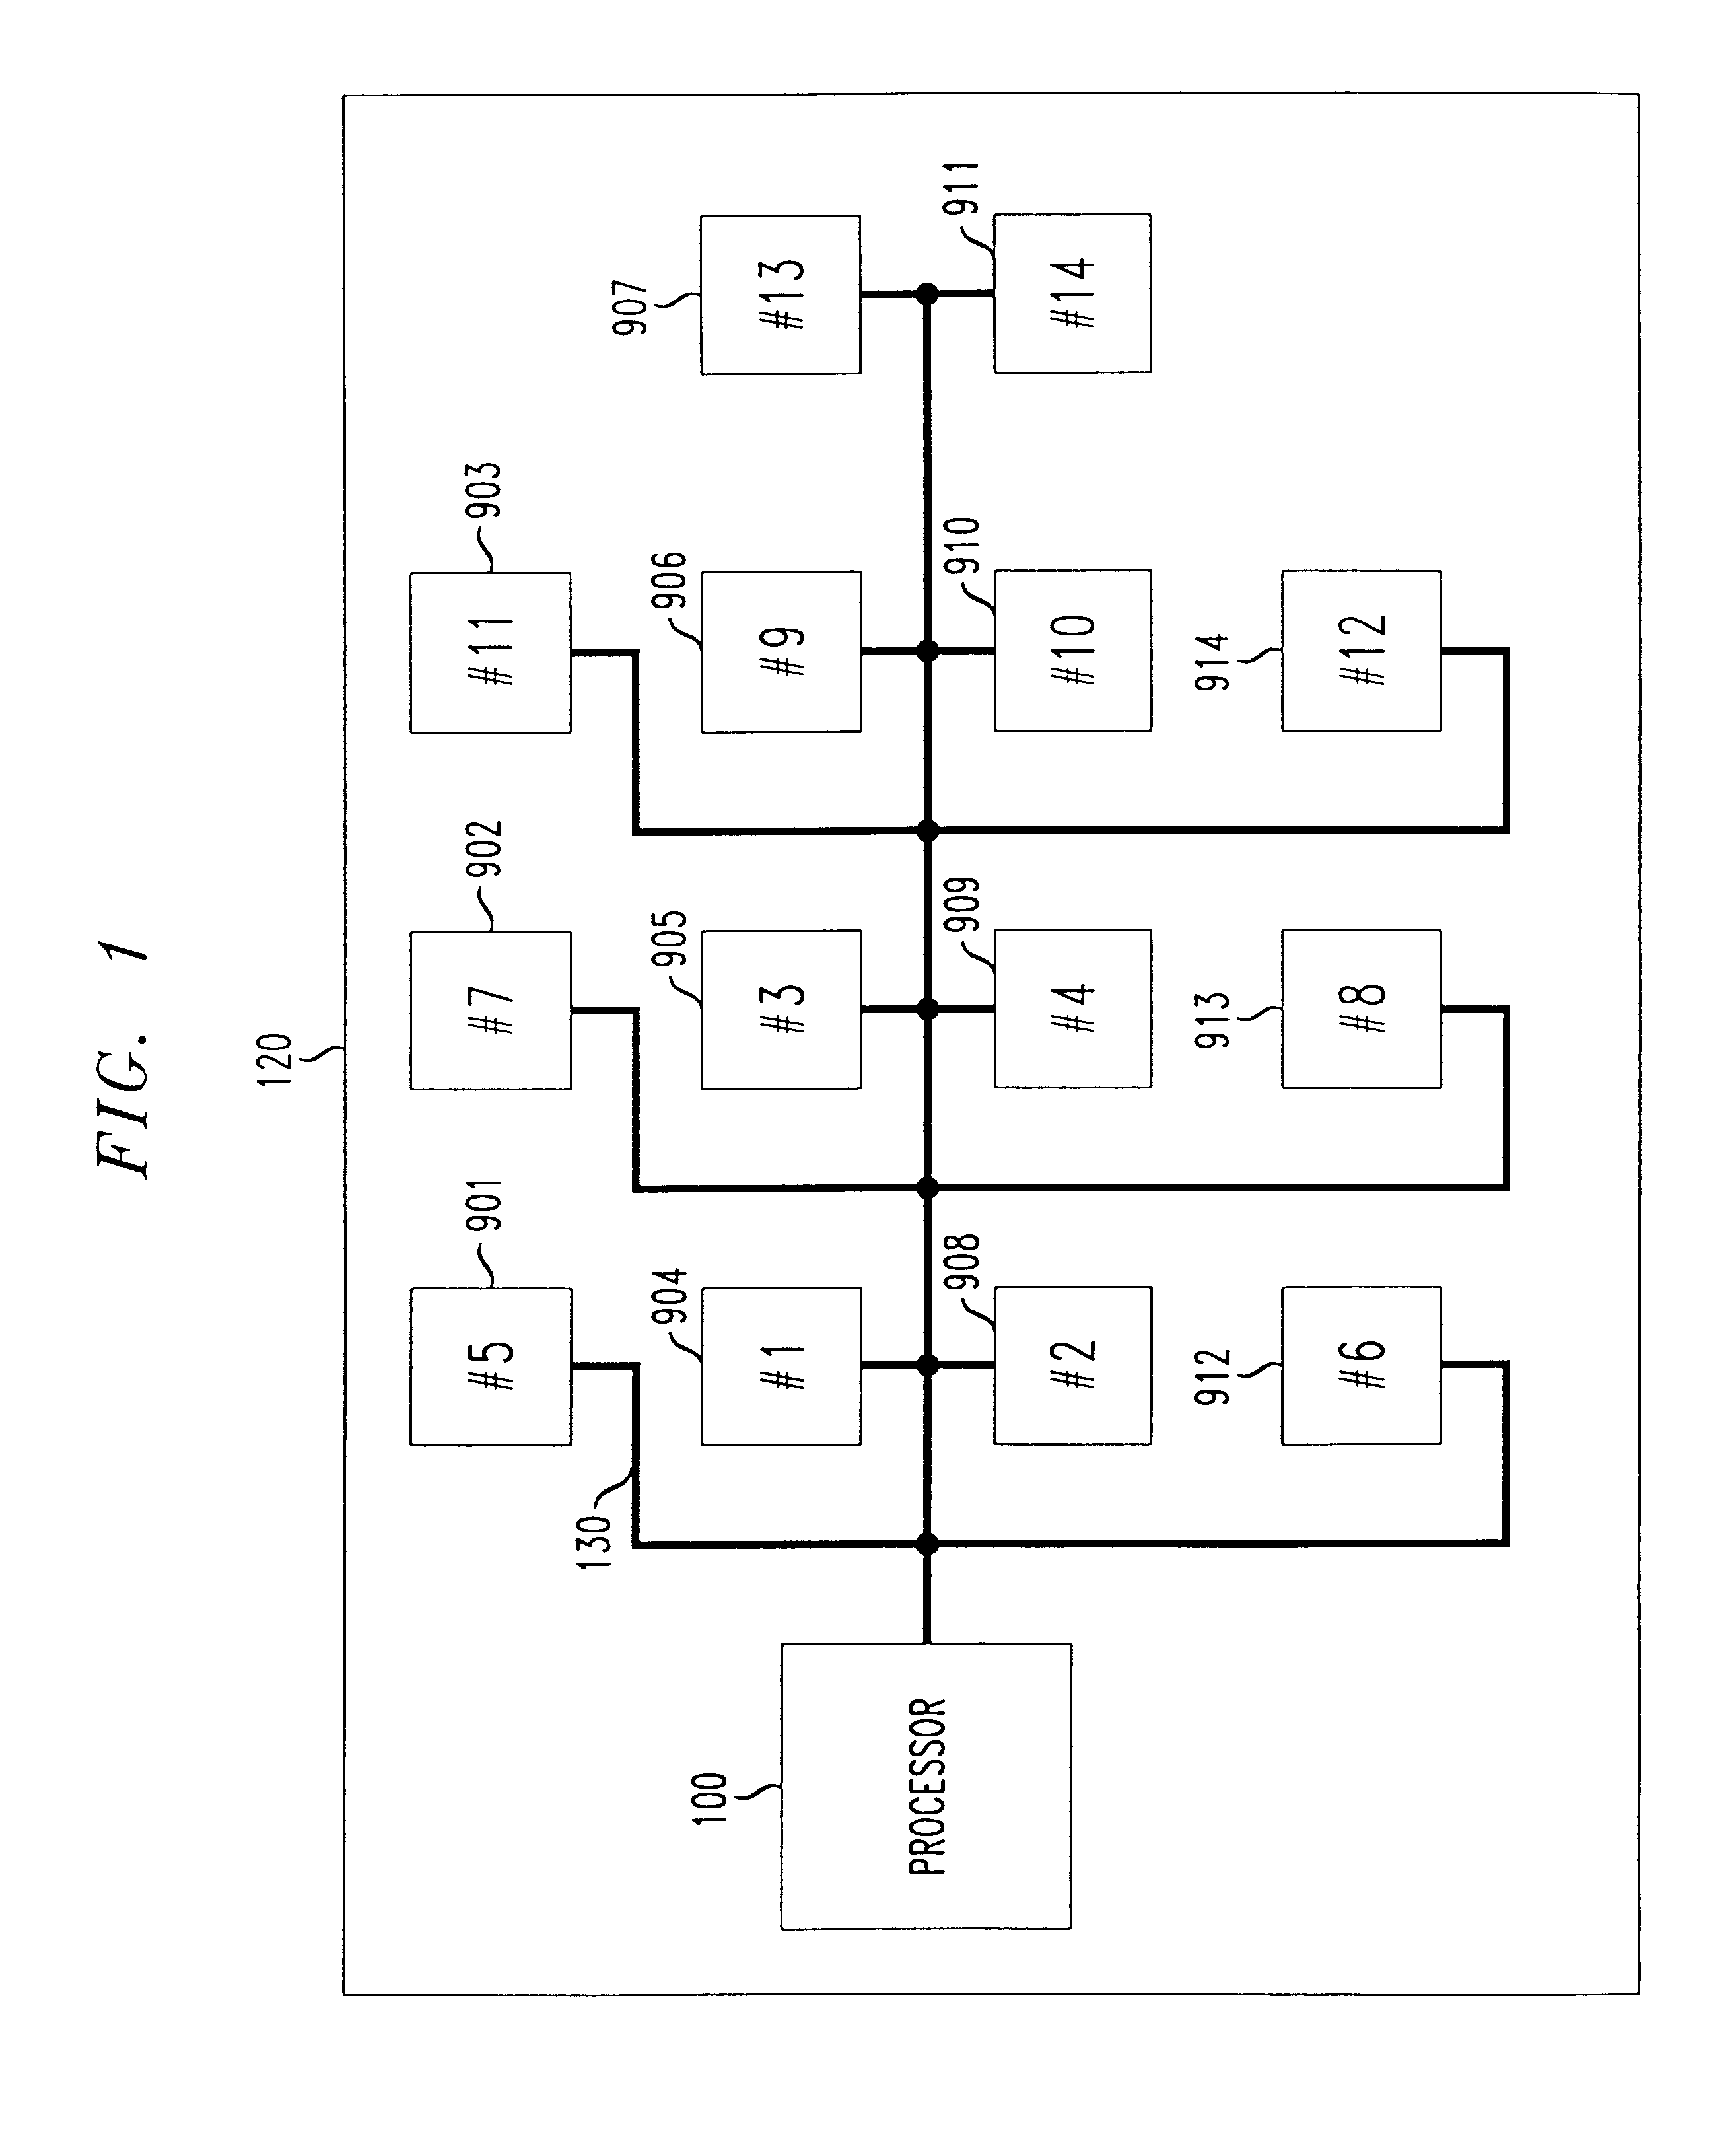 Memory bank organization correlating distance with a memory map